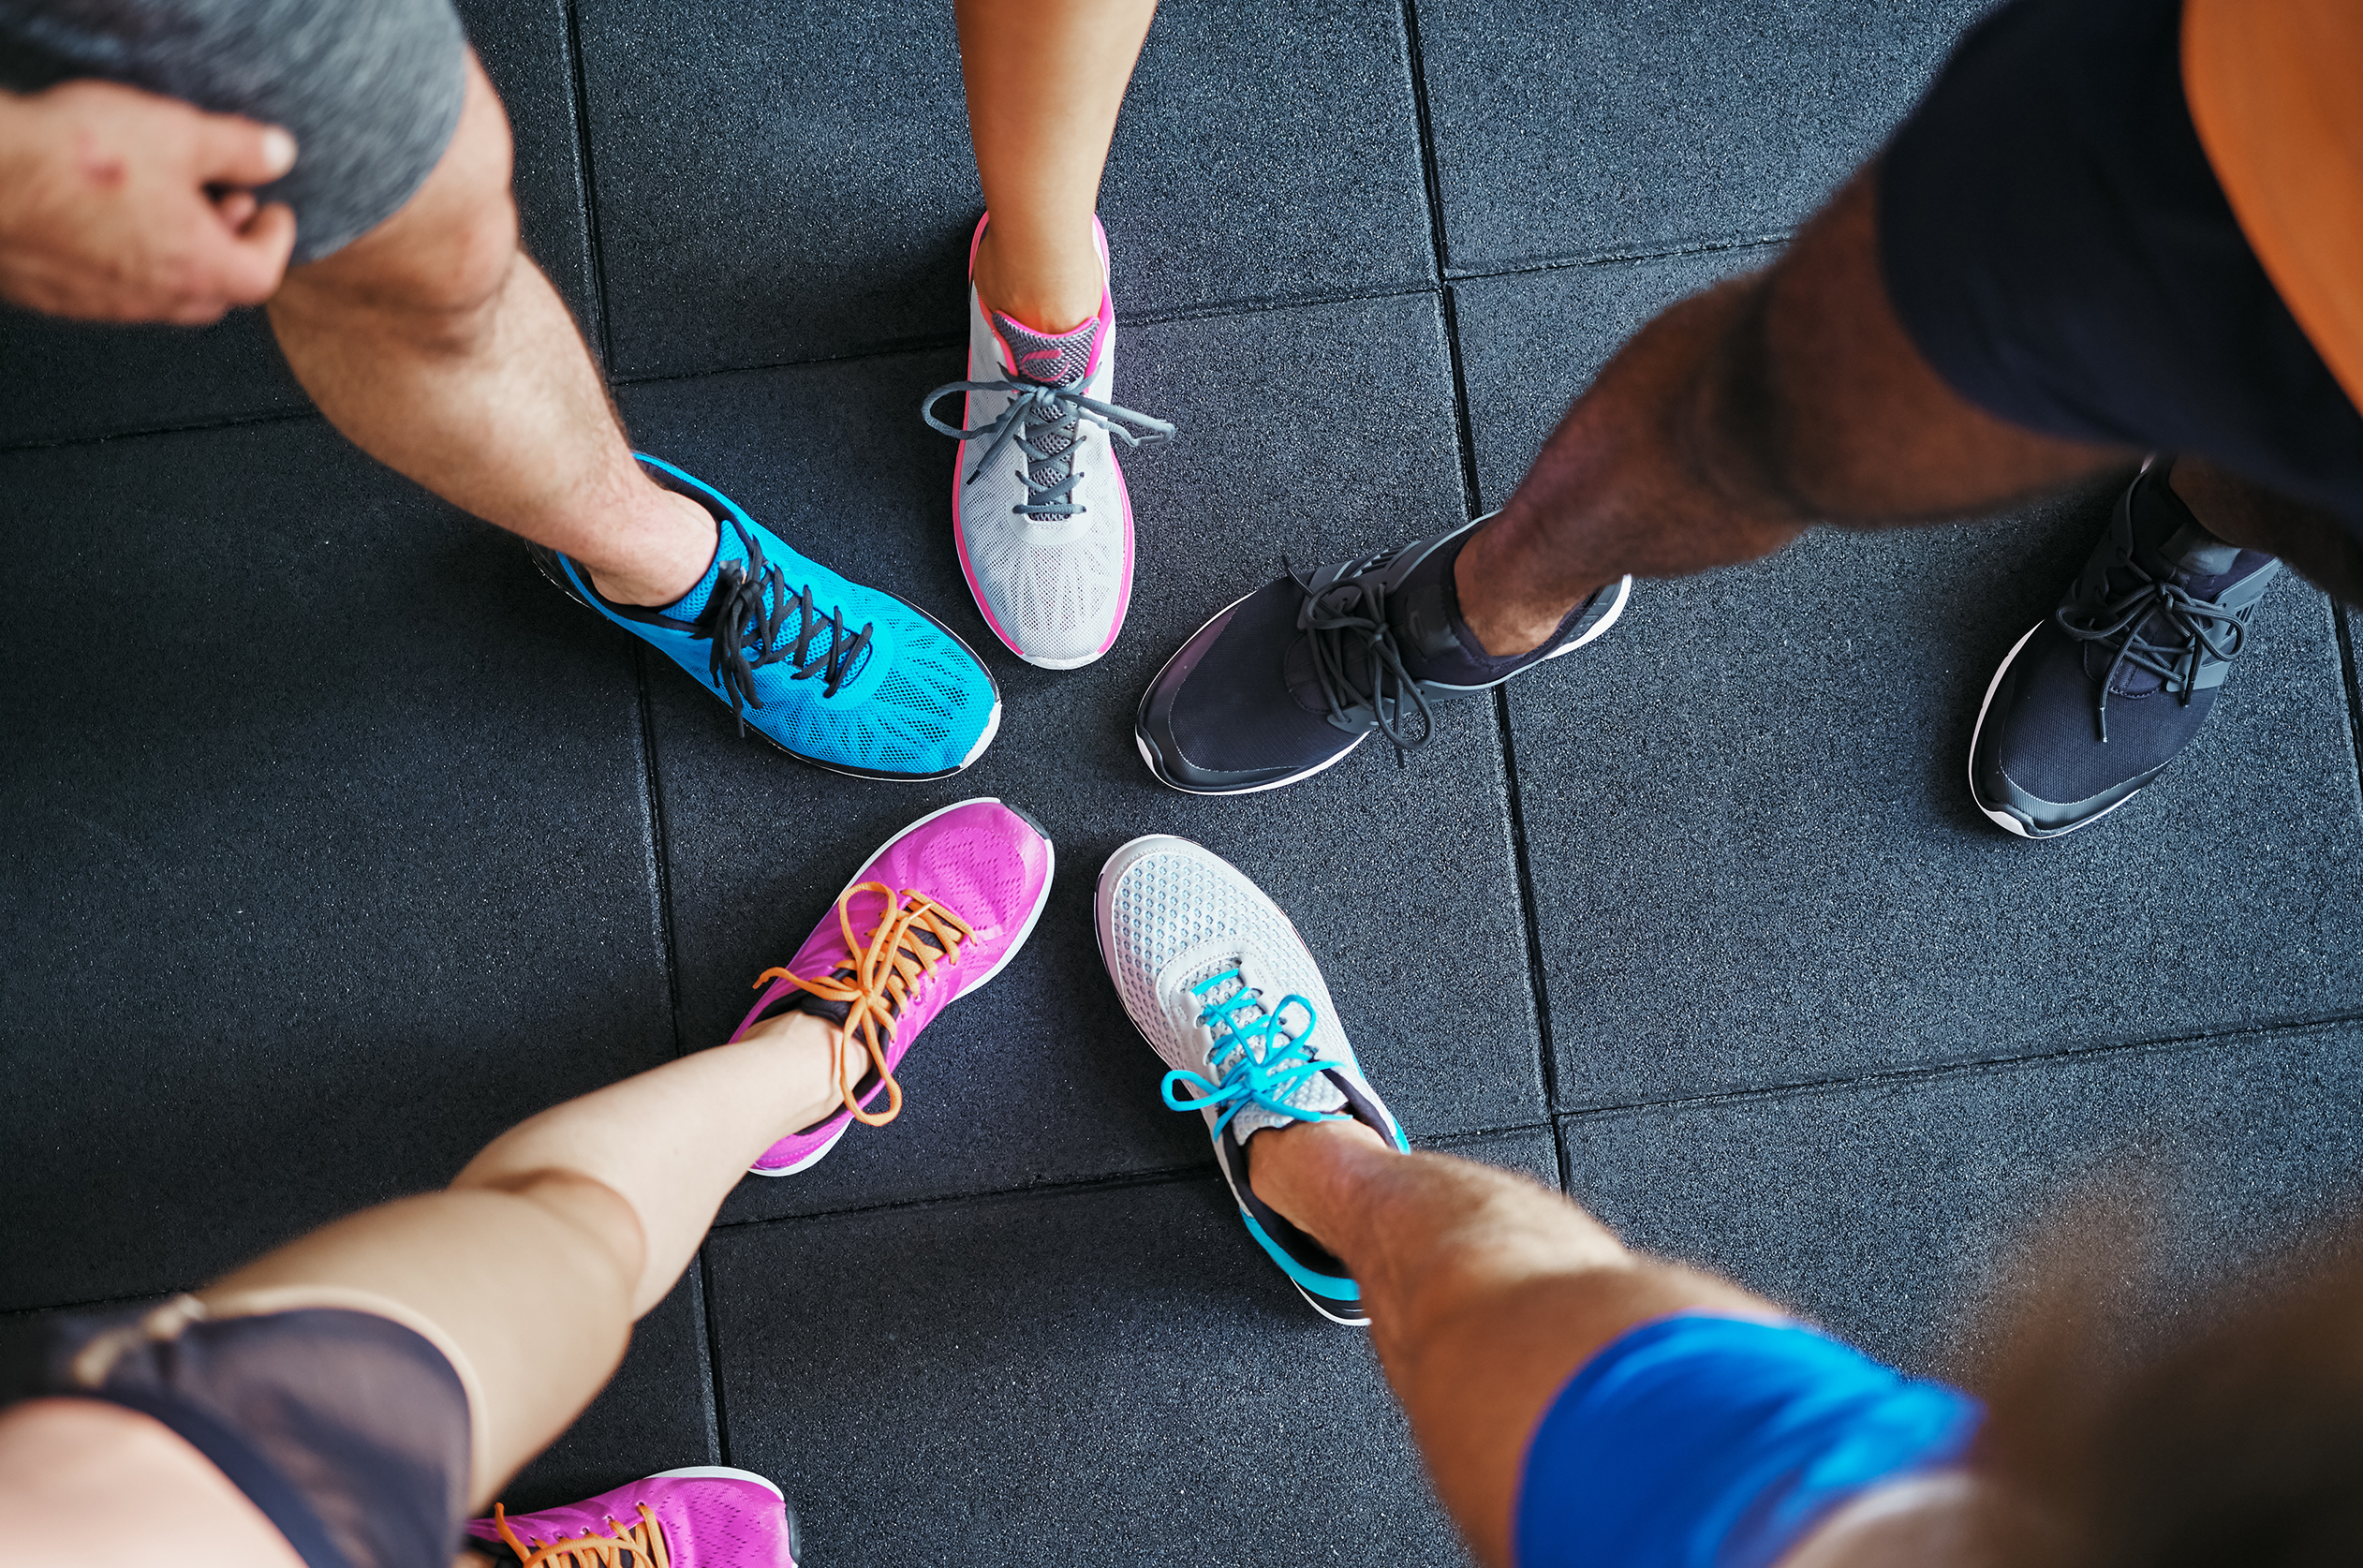 group of runners comparing shoes